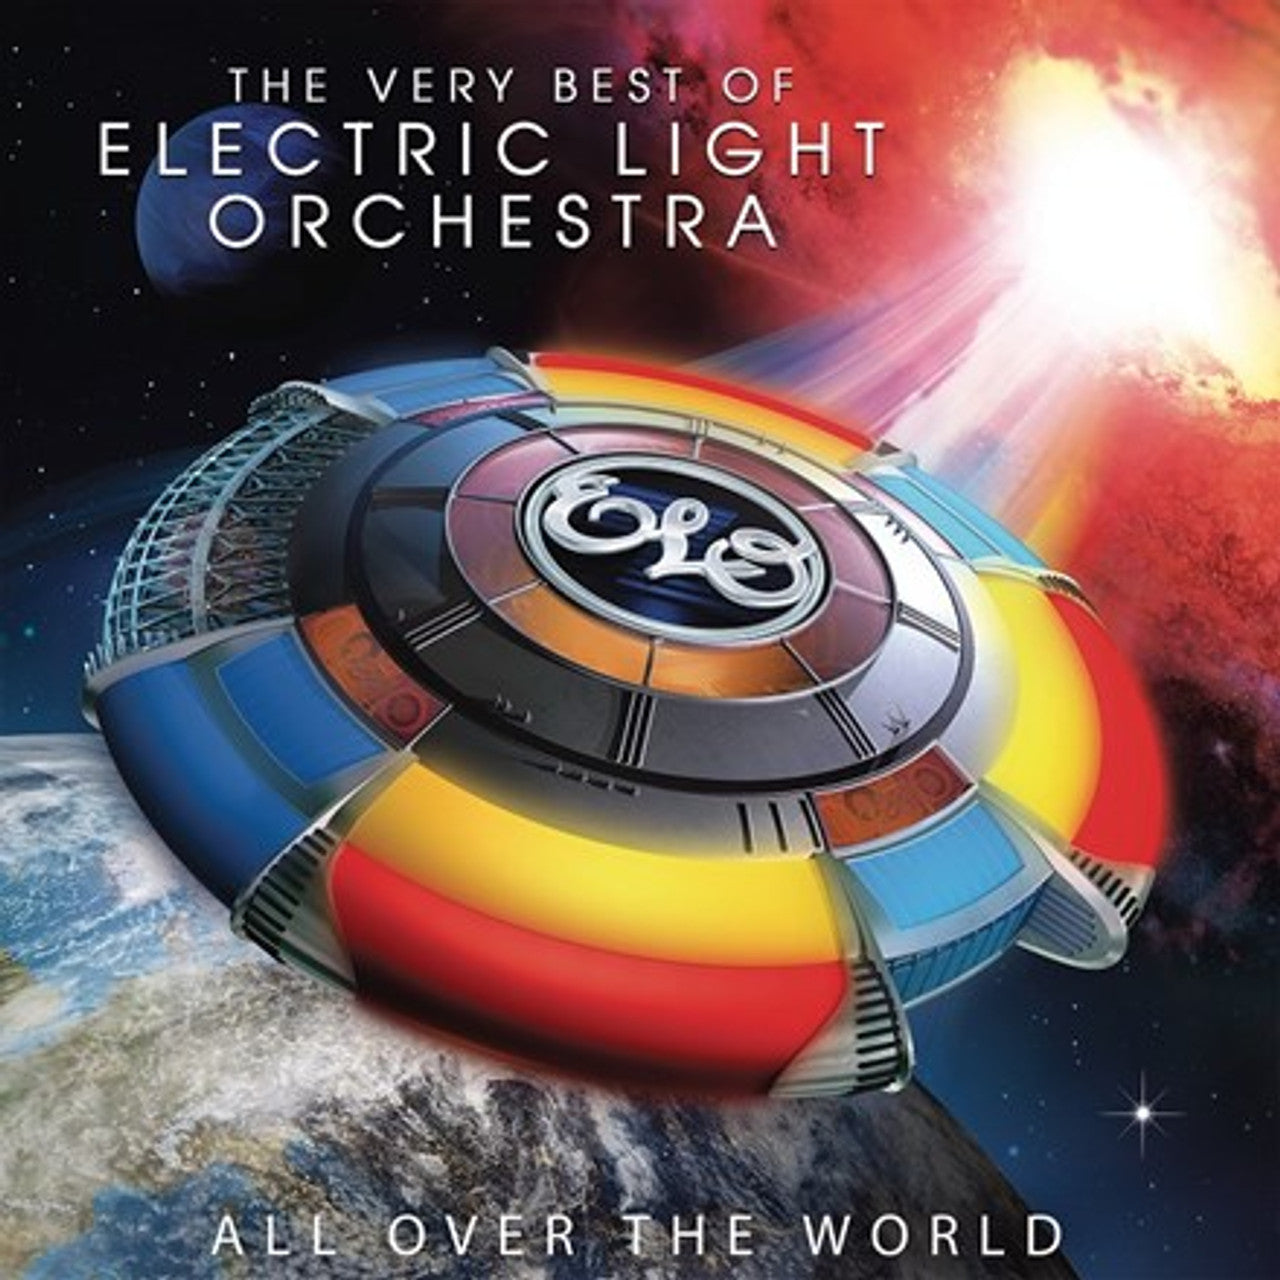 ELECTRIC LIGHT ORCHESTRA - ALL OVER THE WORLD: THE VERY BEST OF ELECTRIC LIGHT ORCHESTRA - 2-LP - VINYL LP